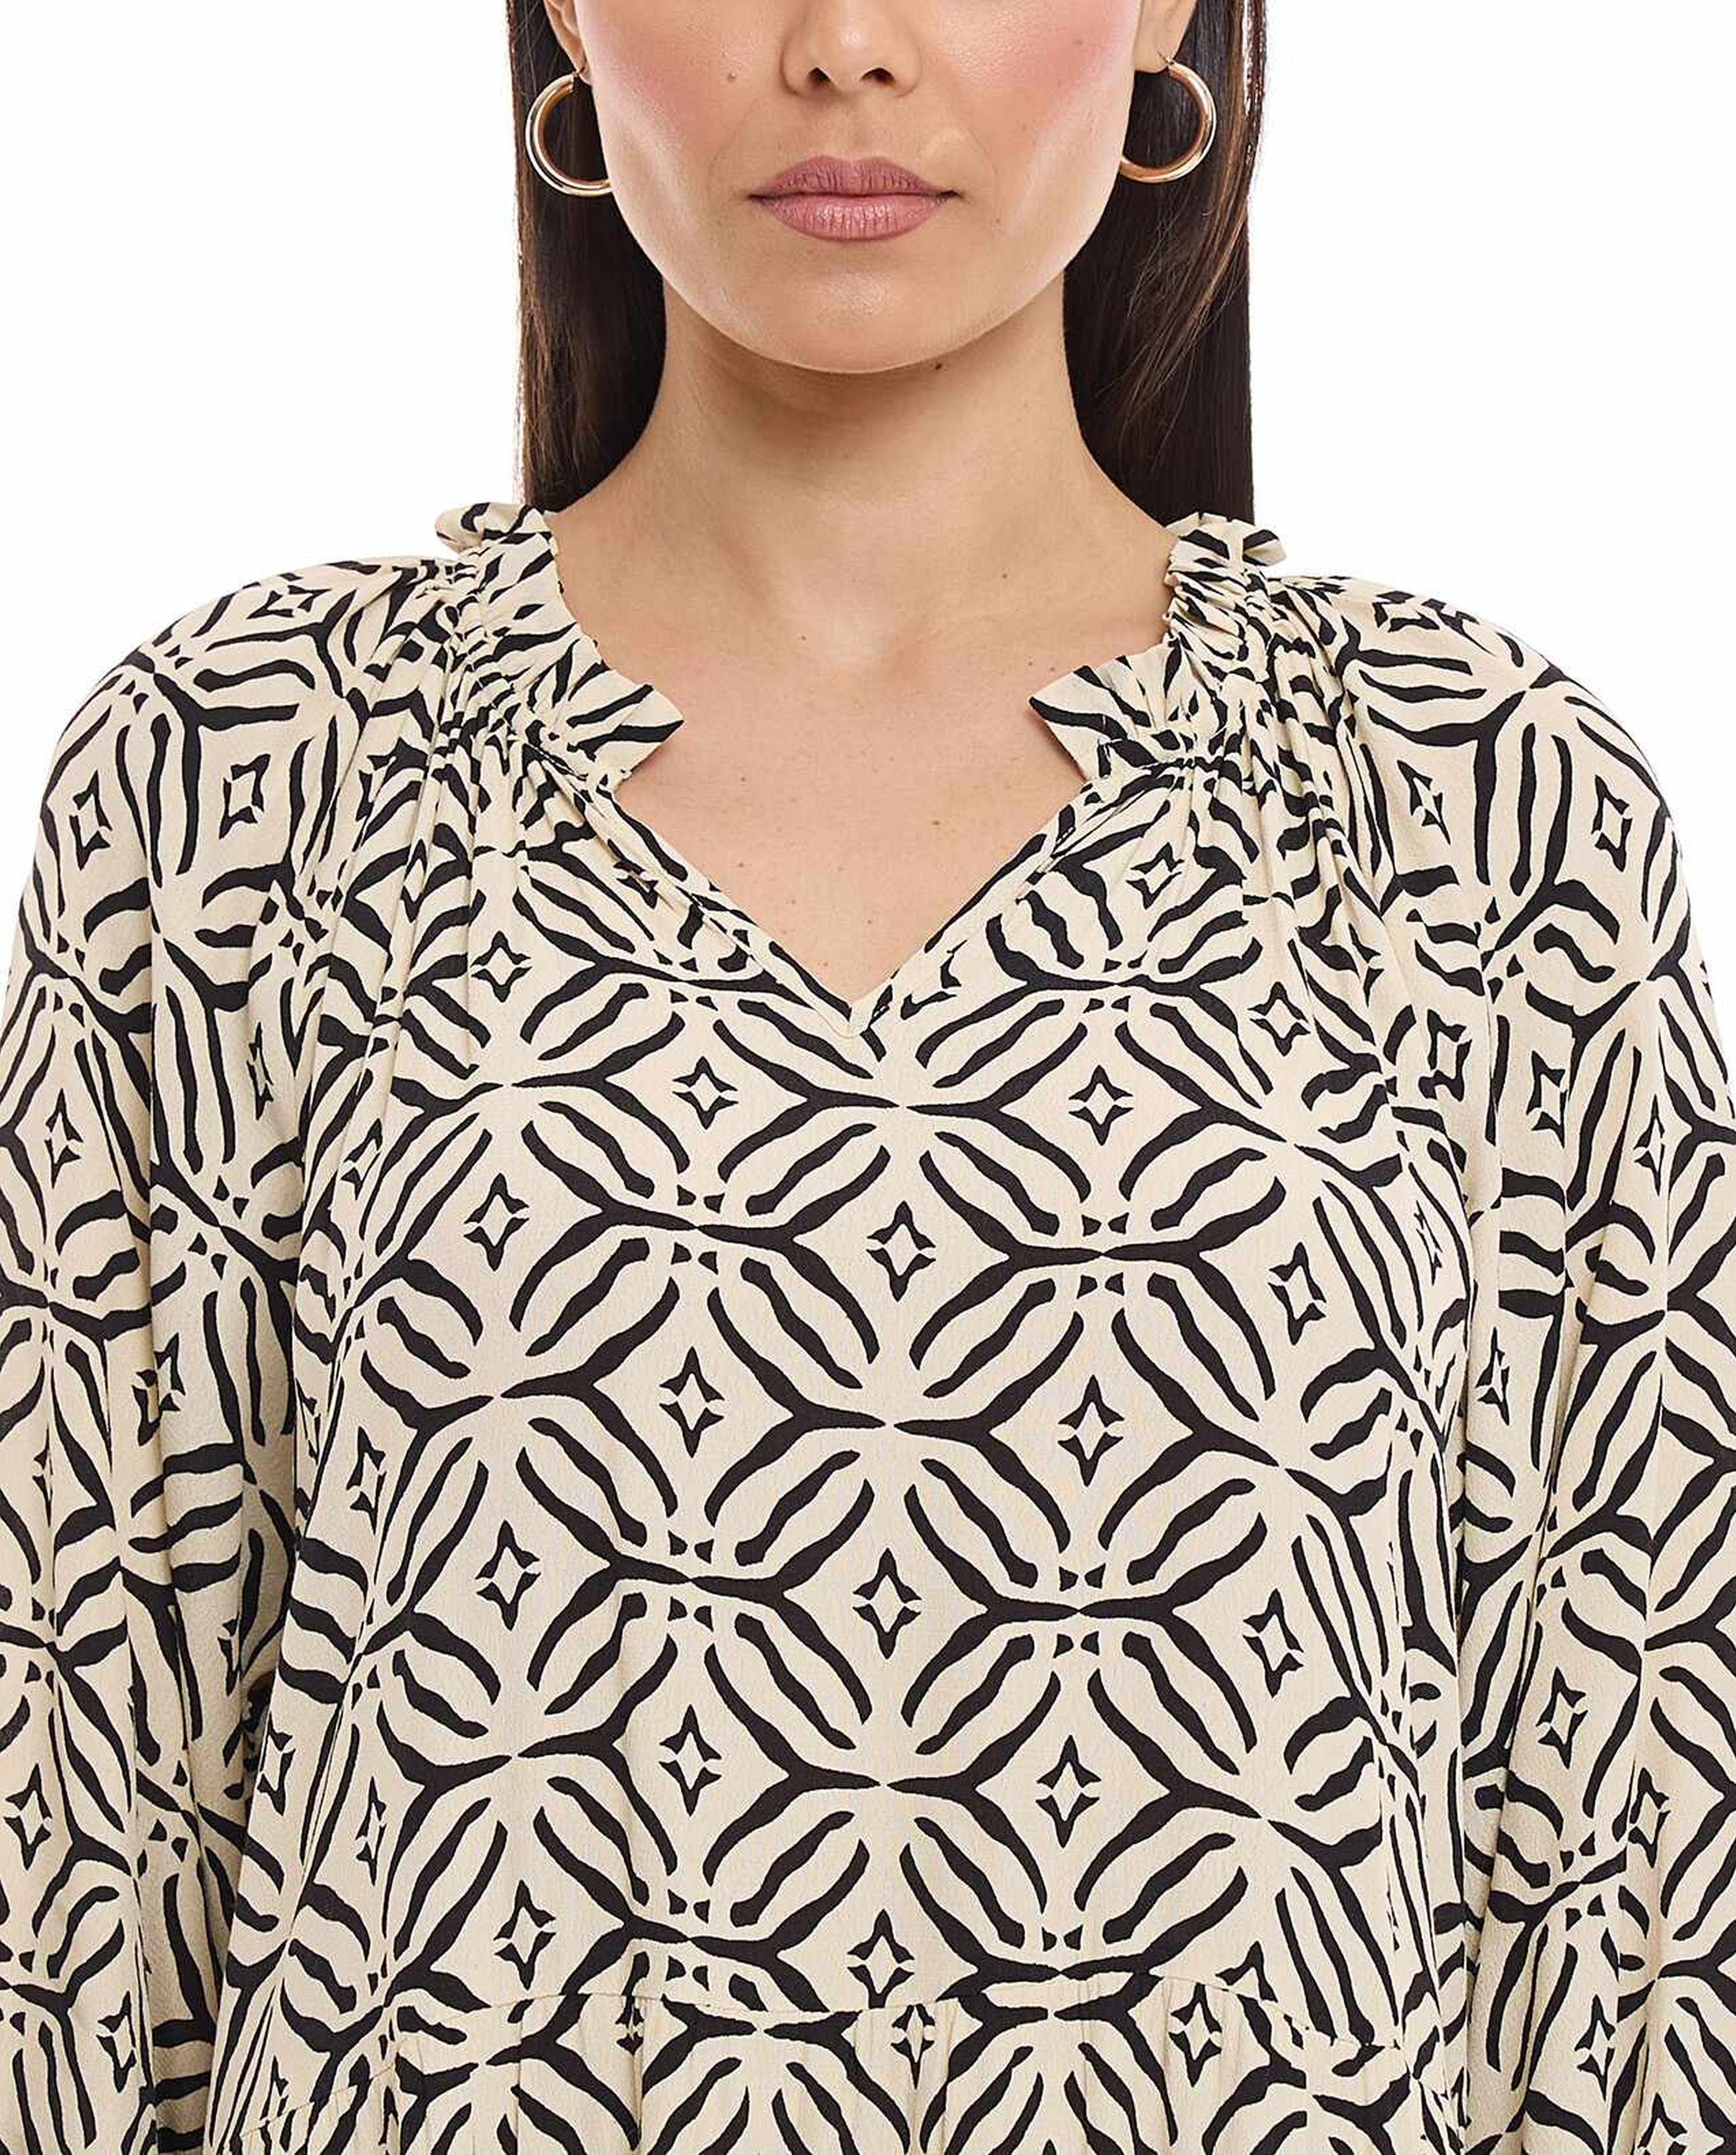 Patterned A-Line Dress with V-Neck and Puff Sleeves